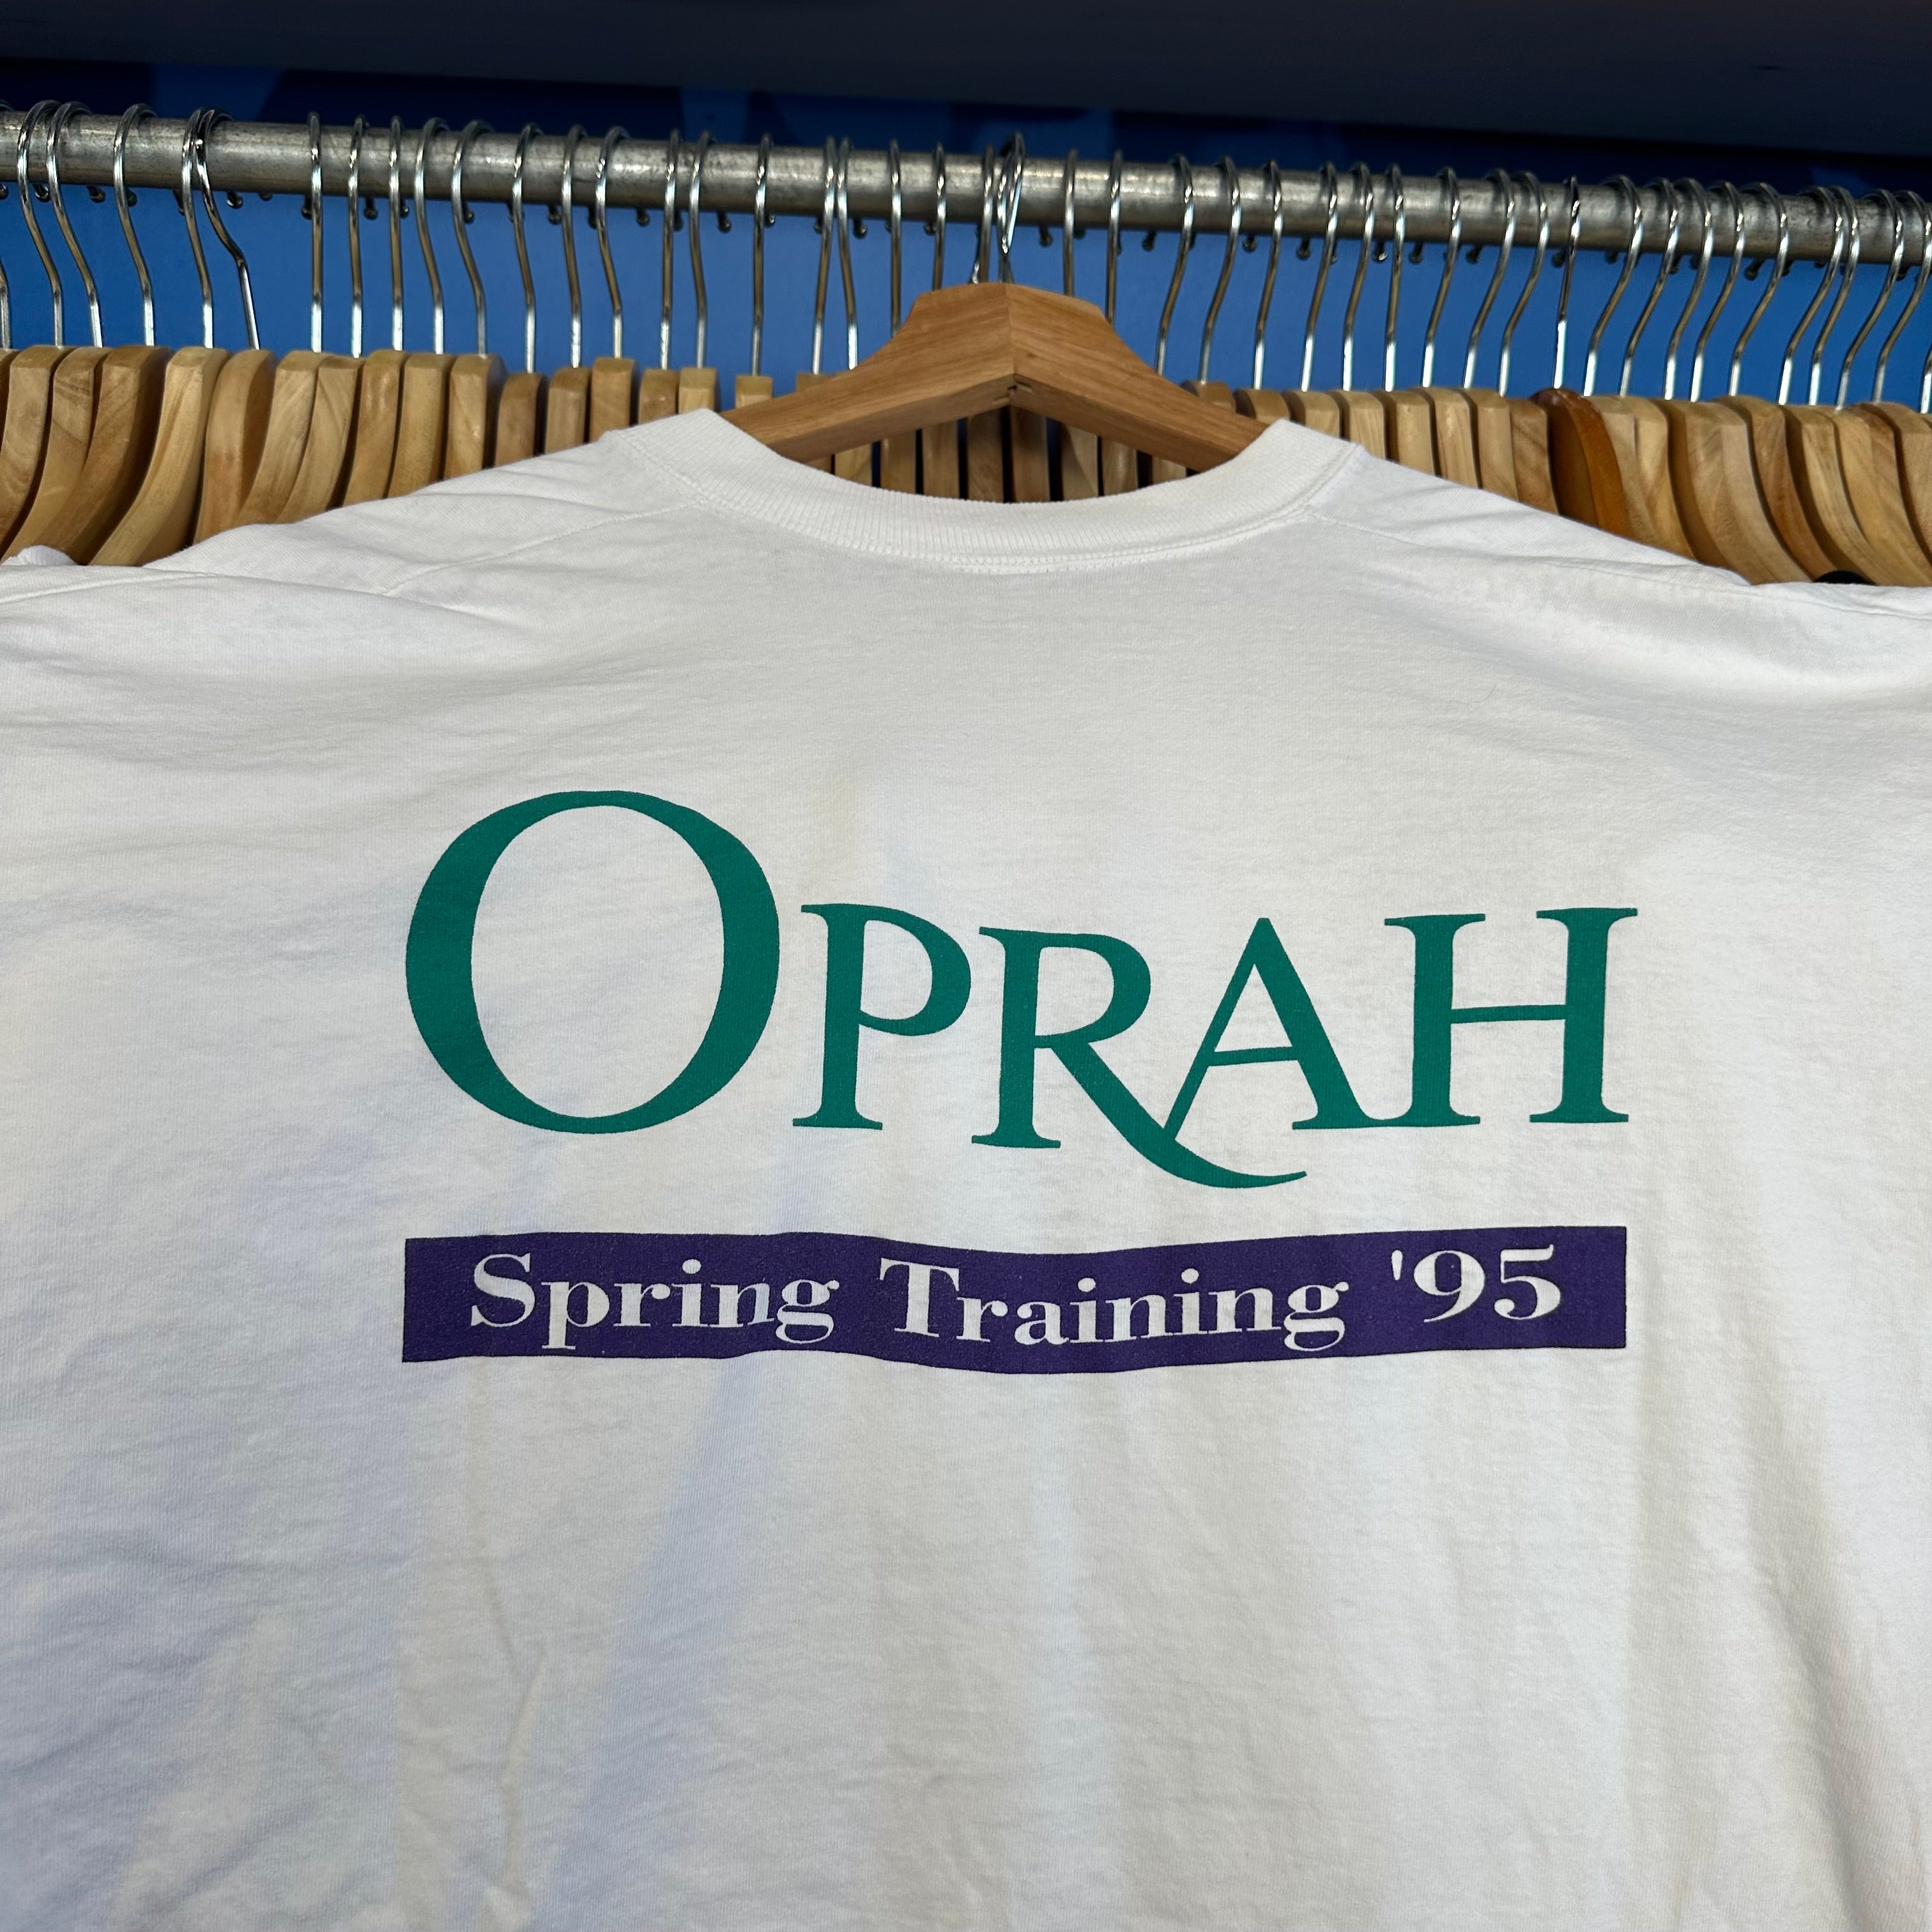 Moving With Oprah T-Shirt